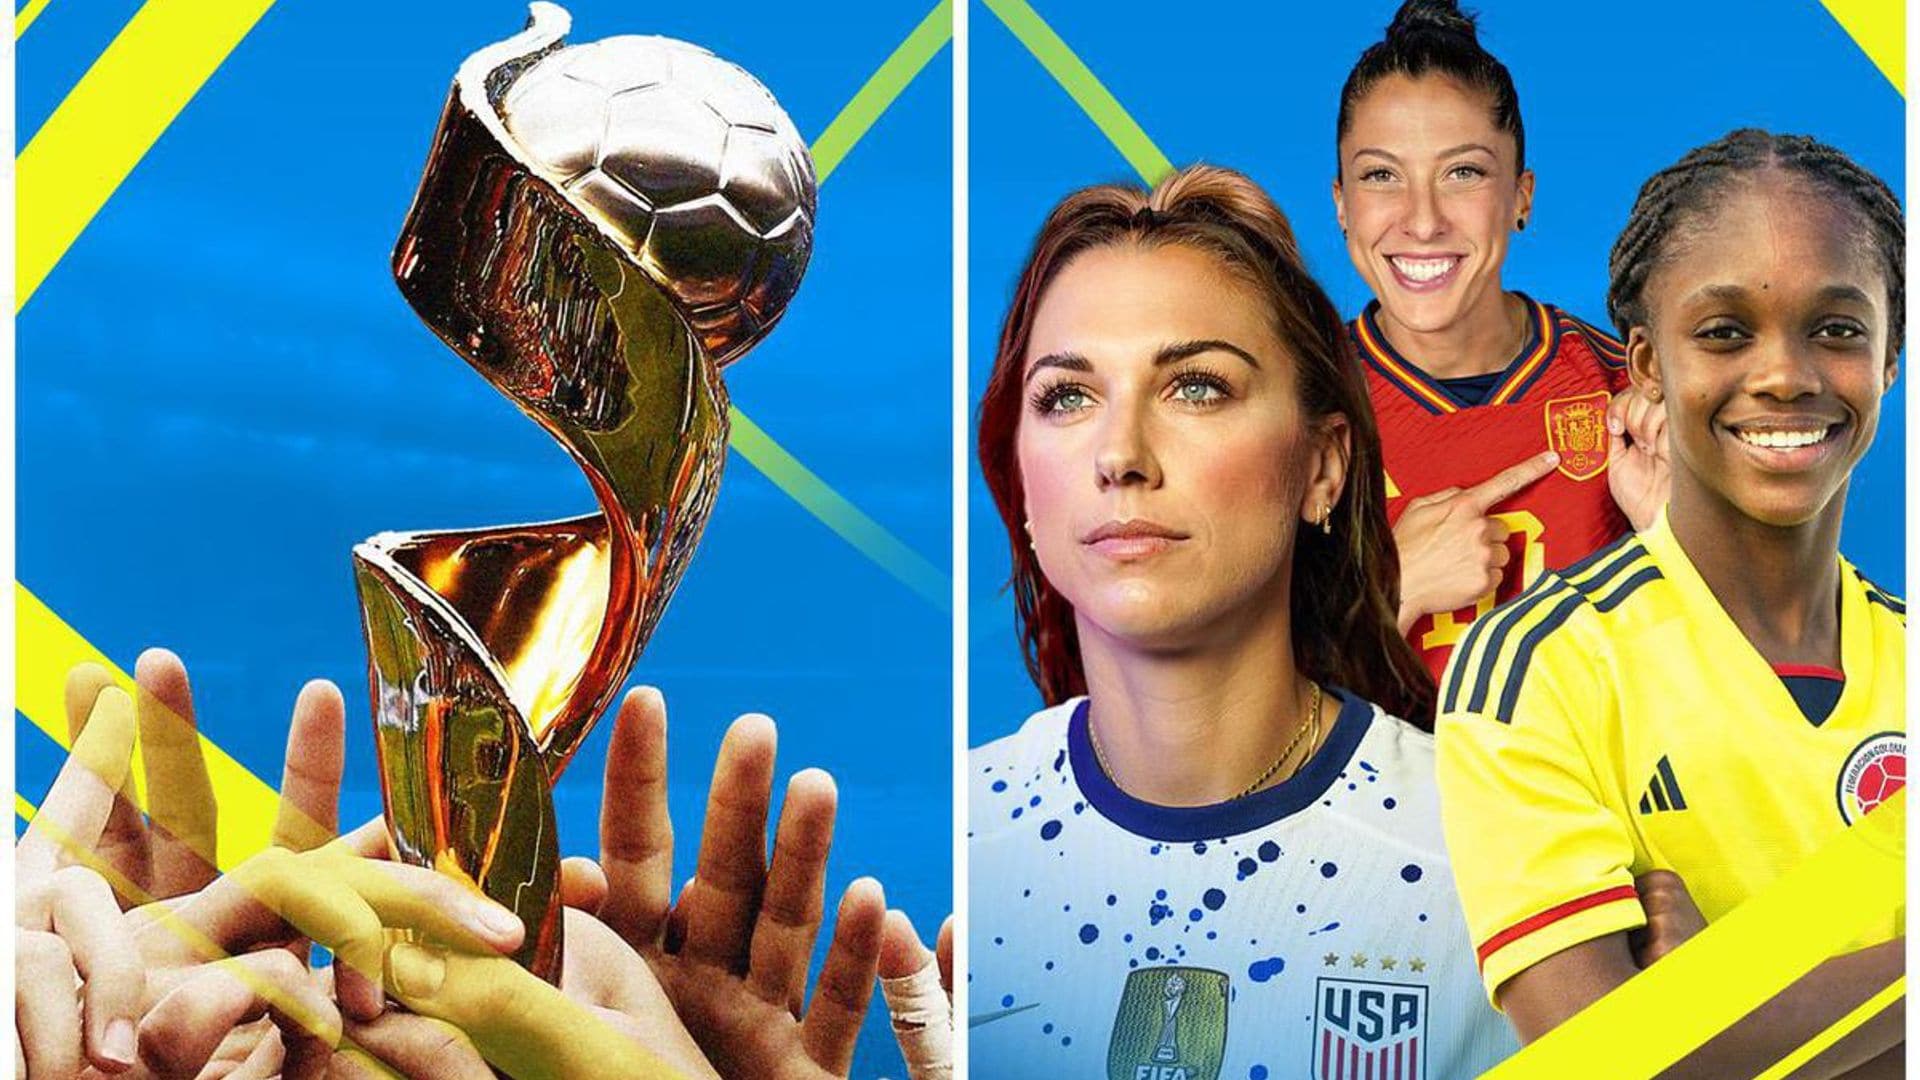 The FIFA Women’s World Cup will have the largest women’s commentary team roster in history